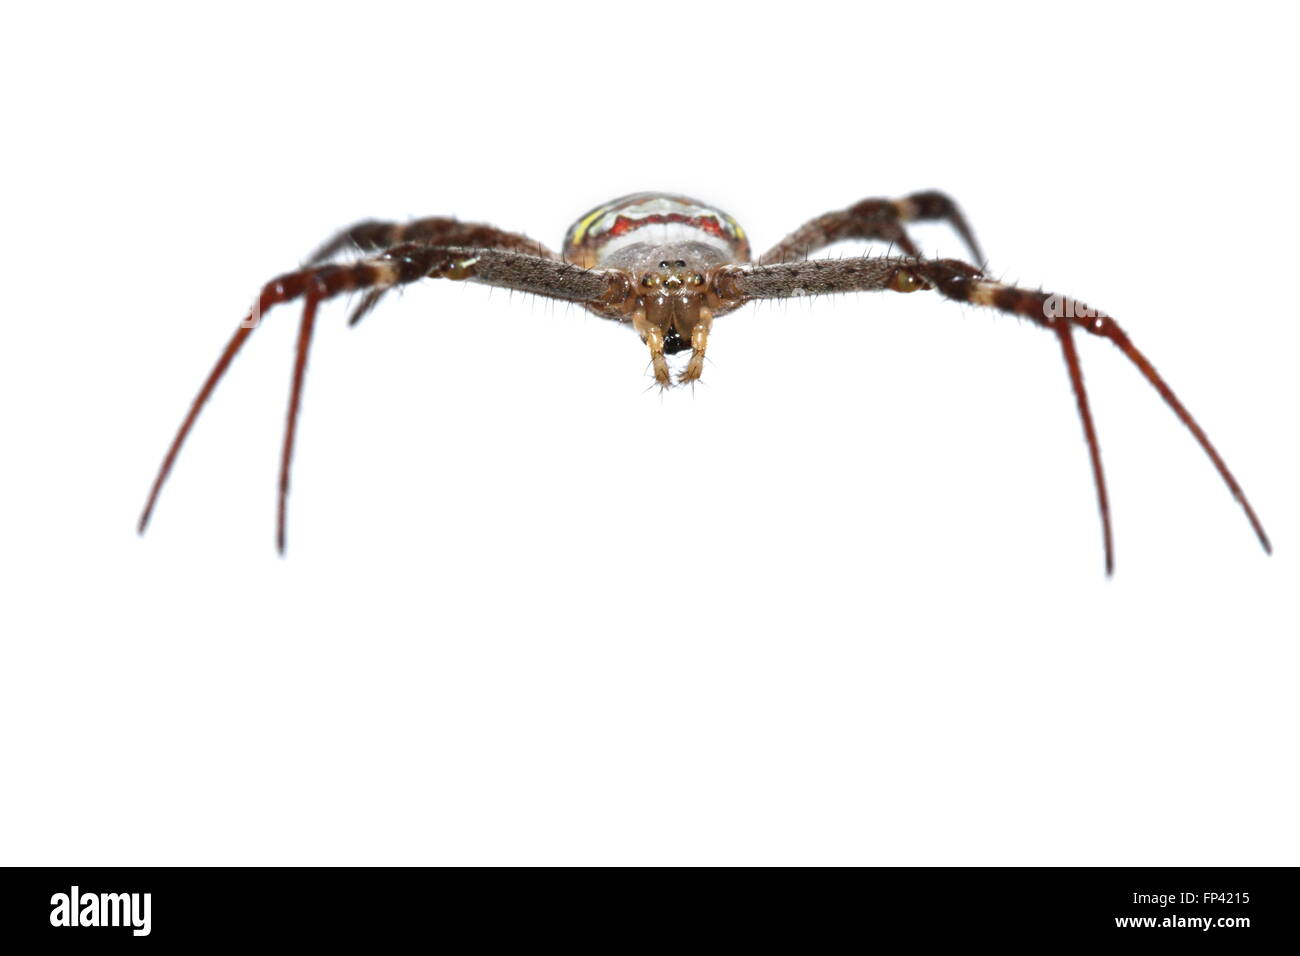 St David's Cross spider photographed against a white background and prepared for cut-out Stock Photo